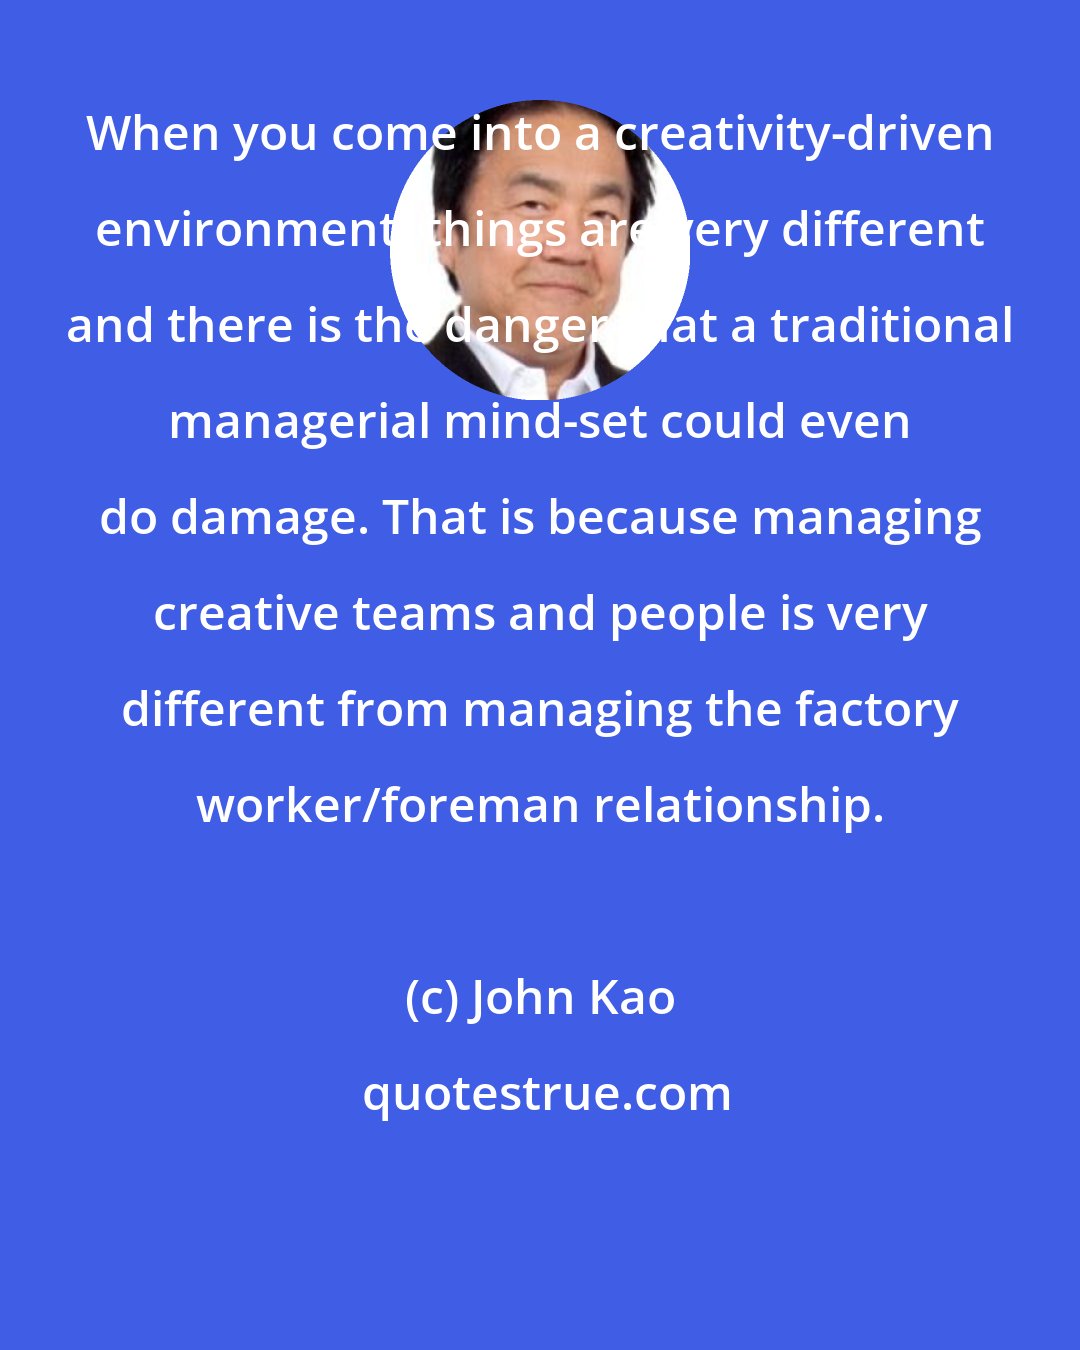 John Kao: When you come into a creativity-driven environment, things are very different and there is the danger that a traditional managerial mind-set could even do damage. That is because managing creative teams and people is very different from managing the factory worker/foreman relationship.